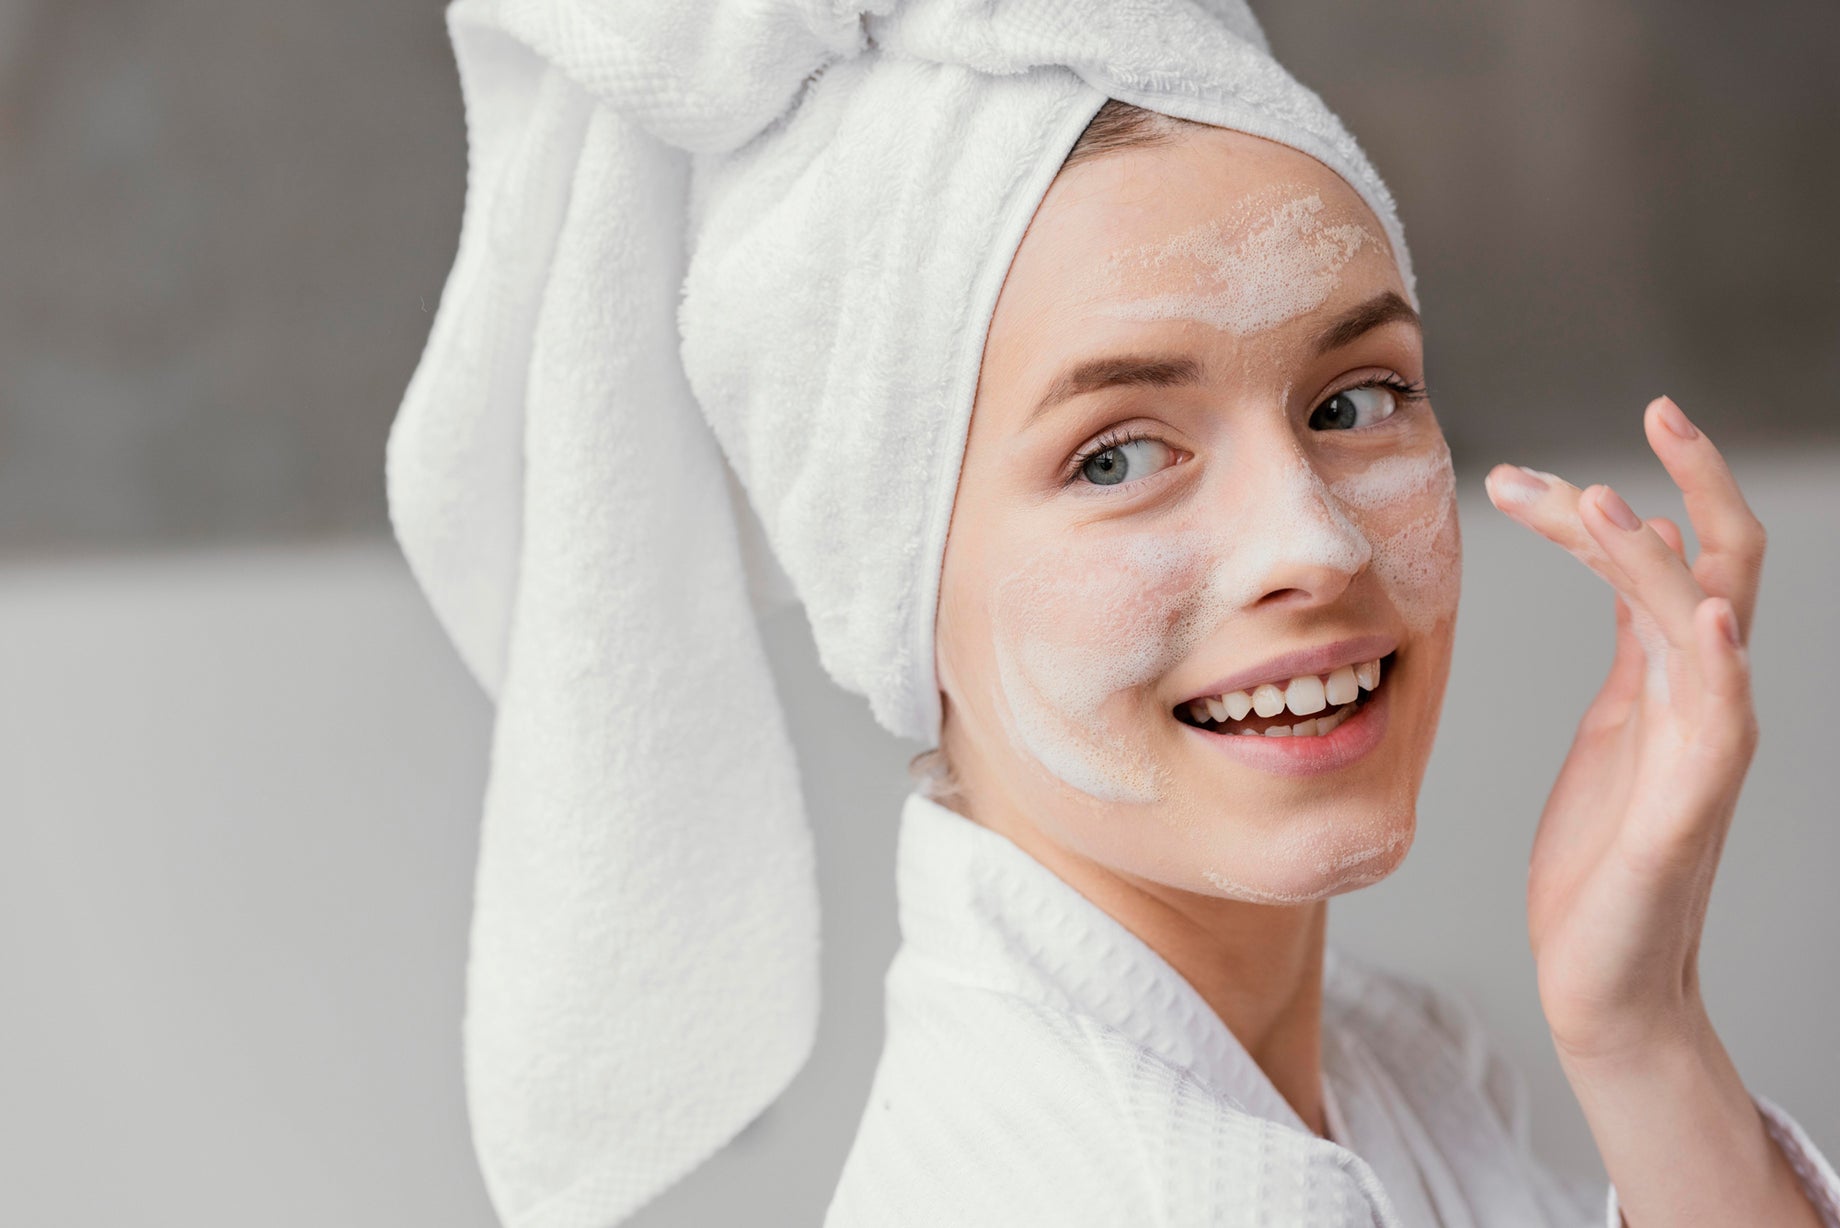 The importance of cleansing the skin in the daily routine